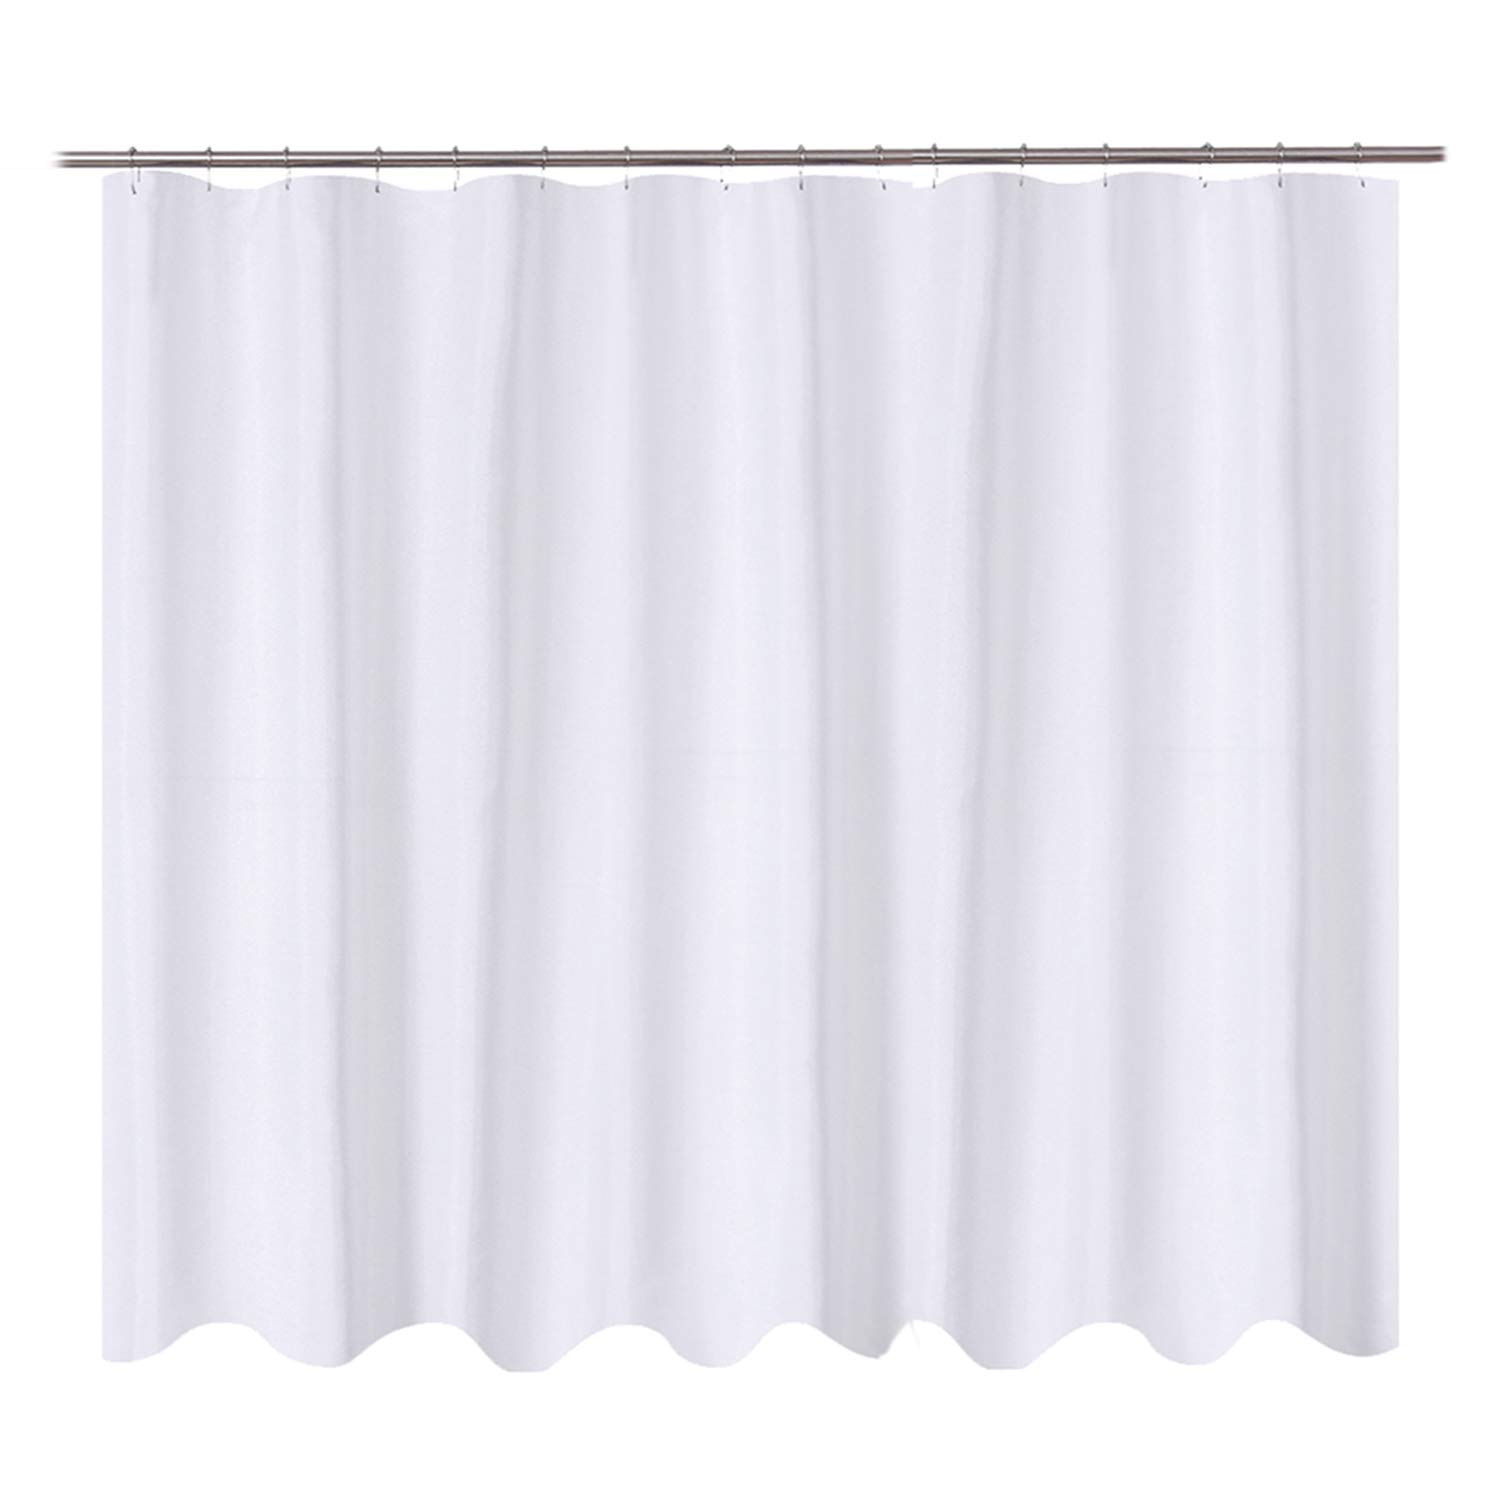 Book Cover N&Y HOME Fabric Shower Curtain Liner Oversize 96 x 72 inches, Hotel Quality, Washable, Water Repellent, White Bathroom Curtains with Grommets, 96x72